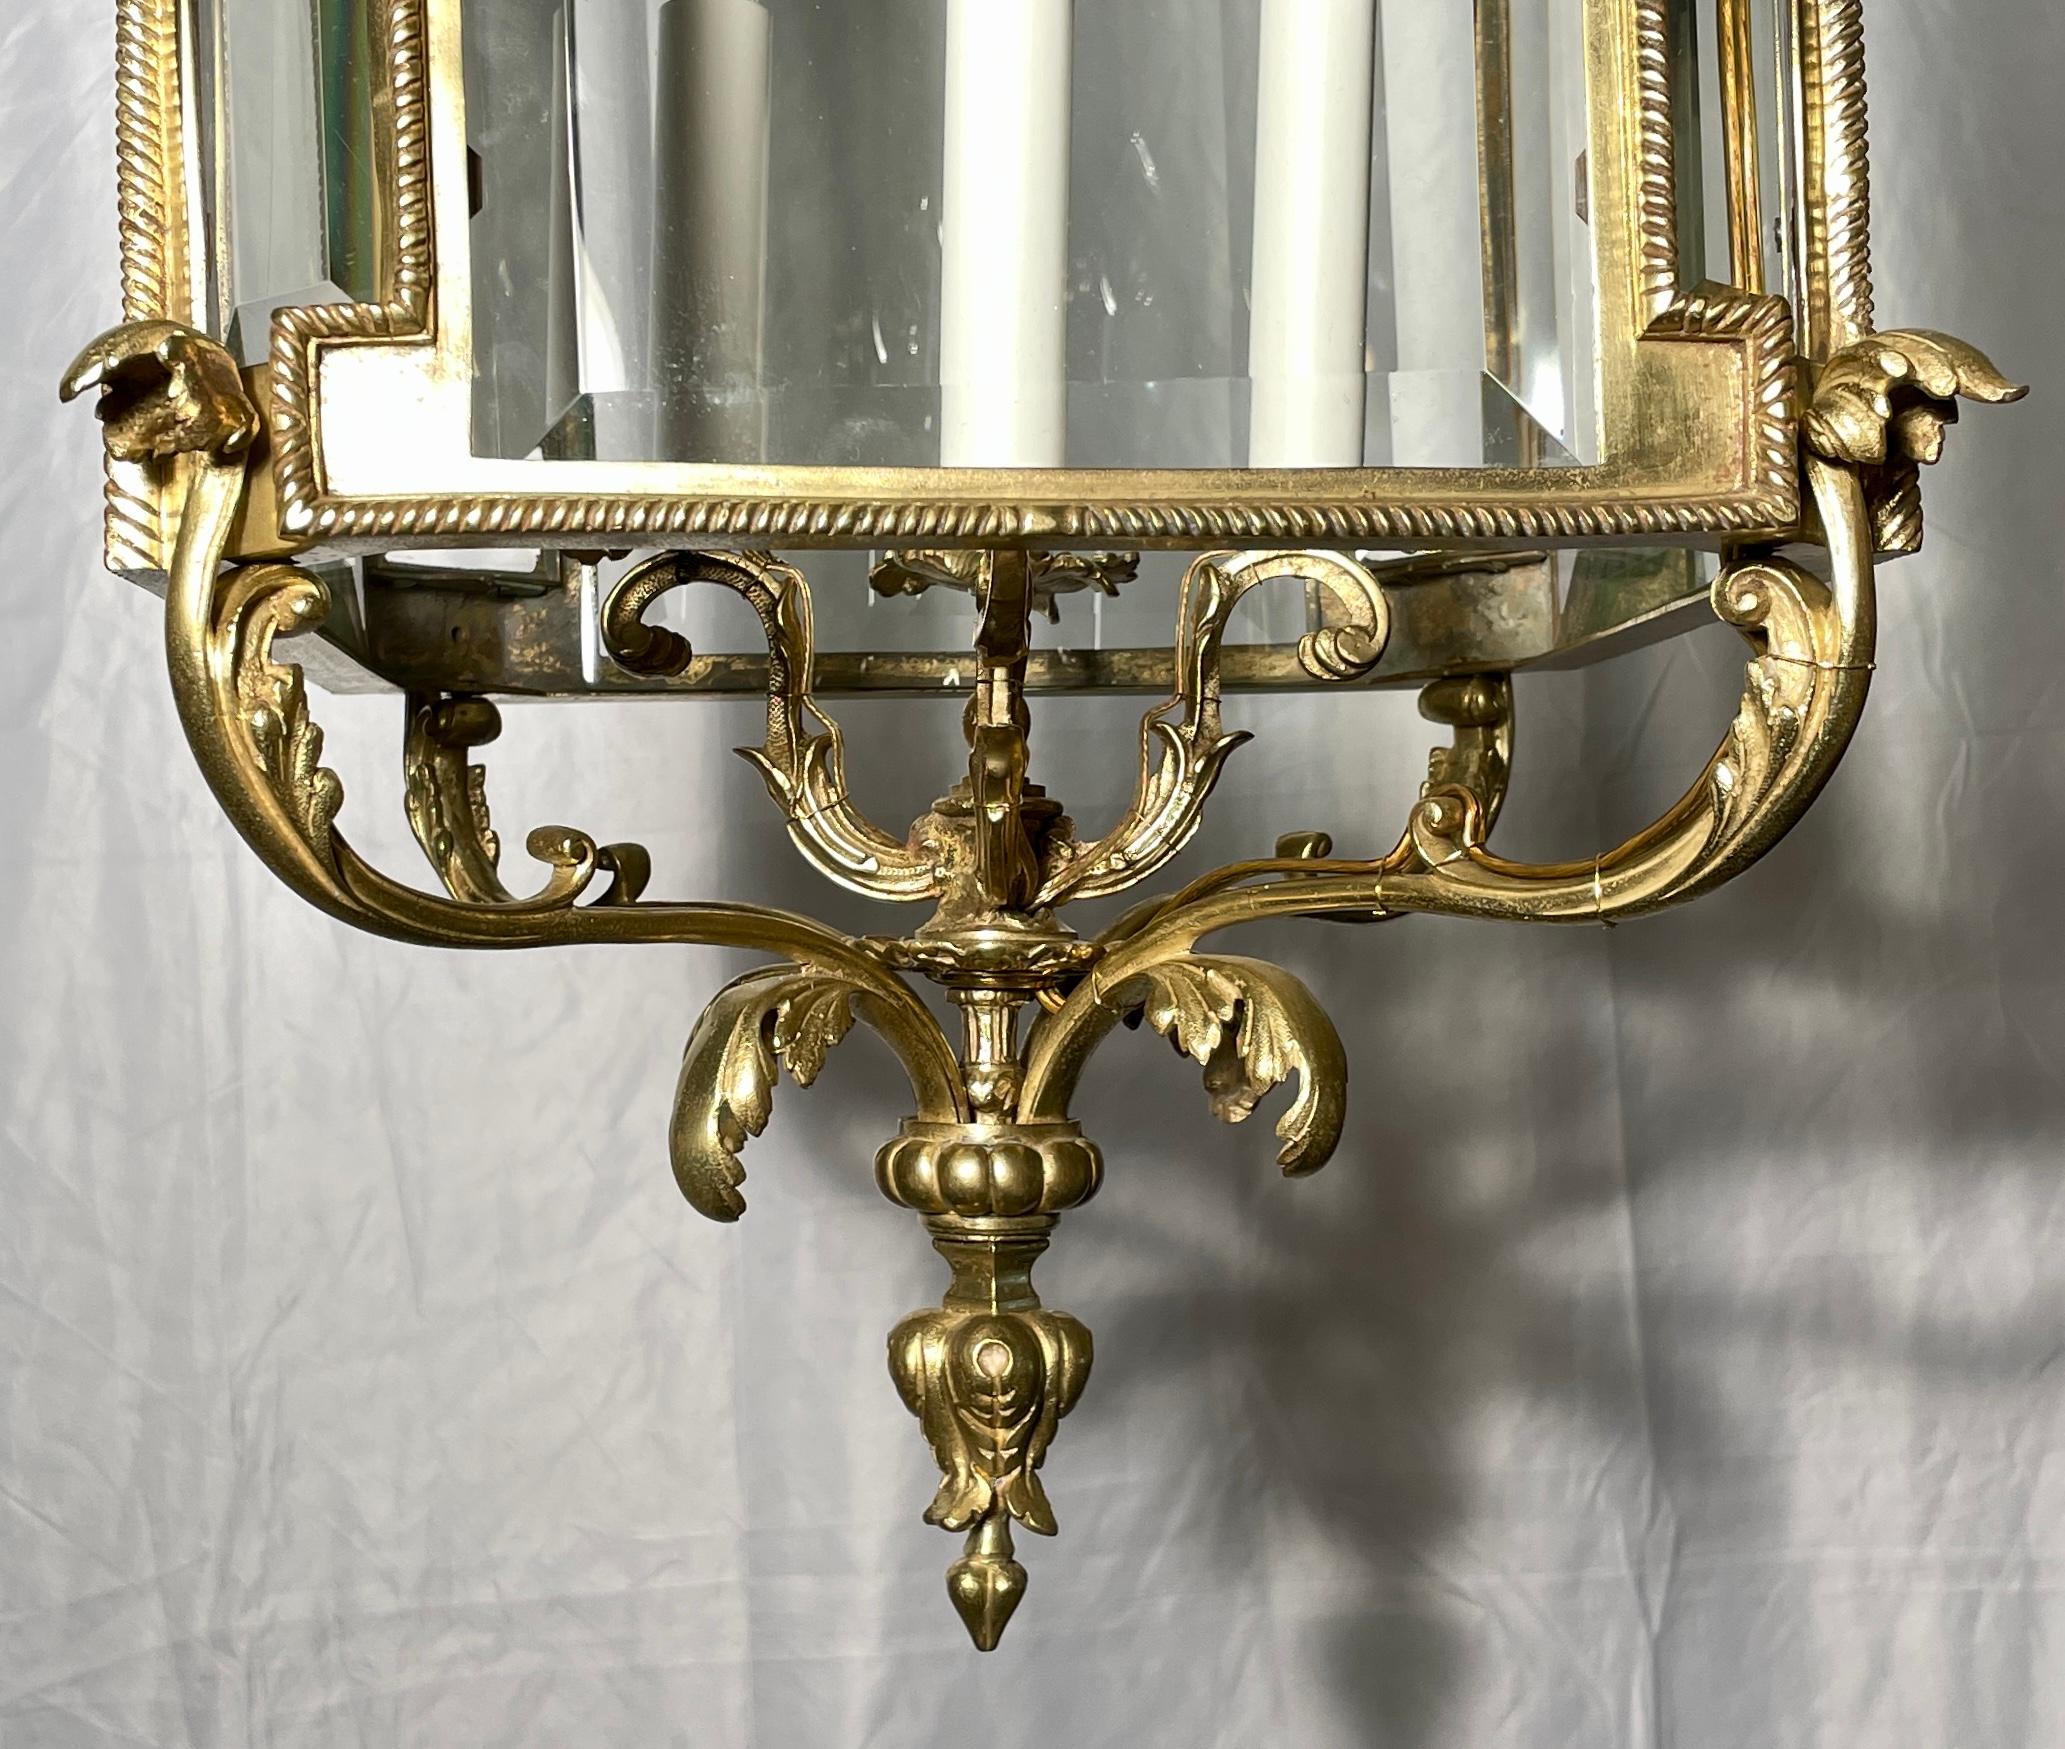 20th Century Antique French Gold Bronze and Beveled Glass Lantern, circa 1900 For Sale